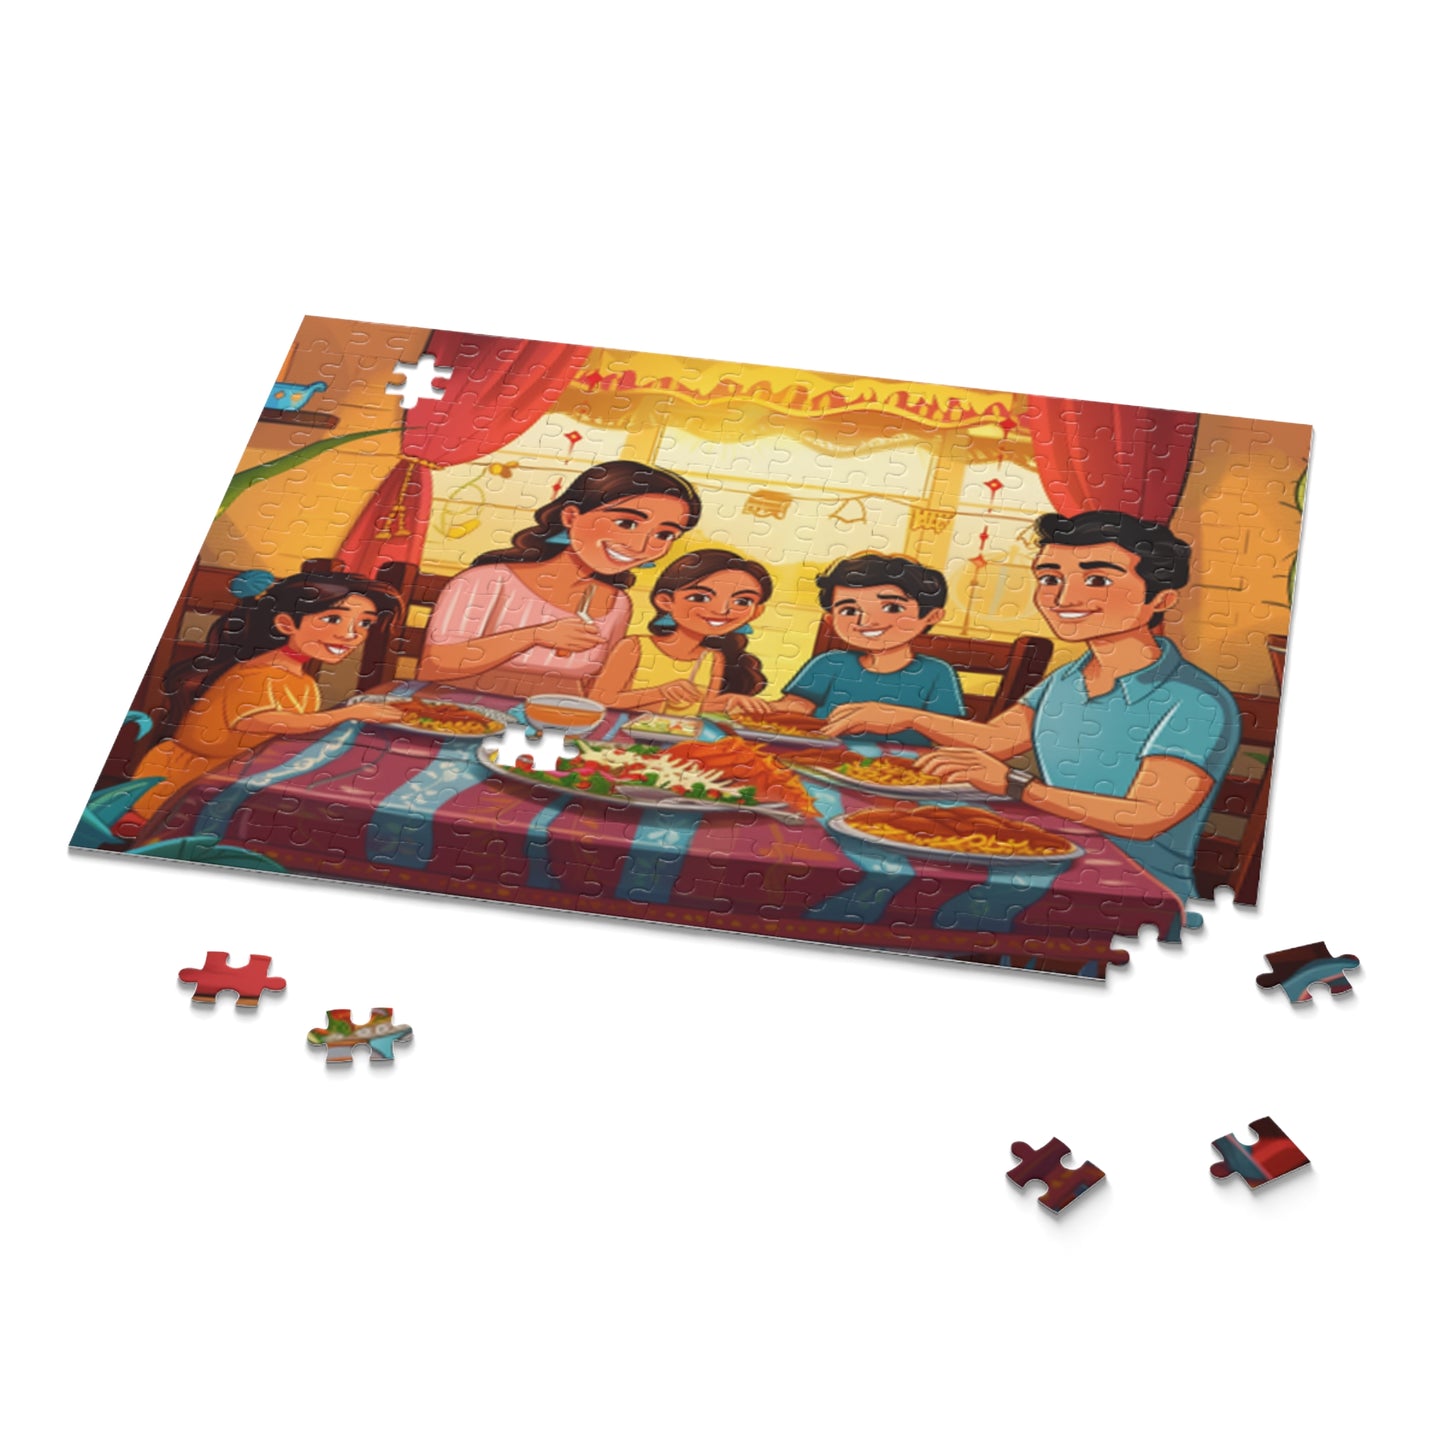 Mexican Family Retro Art Jigsaw Puzzle Adult Birthday Business Jigsaw Puzzle Gift for Him Funny Humorous Indoor Outdoor Game Gift For Her Online-9